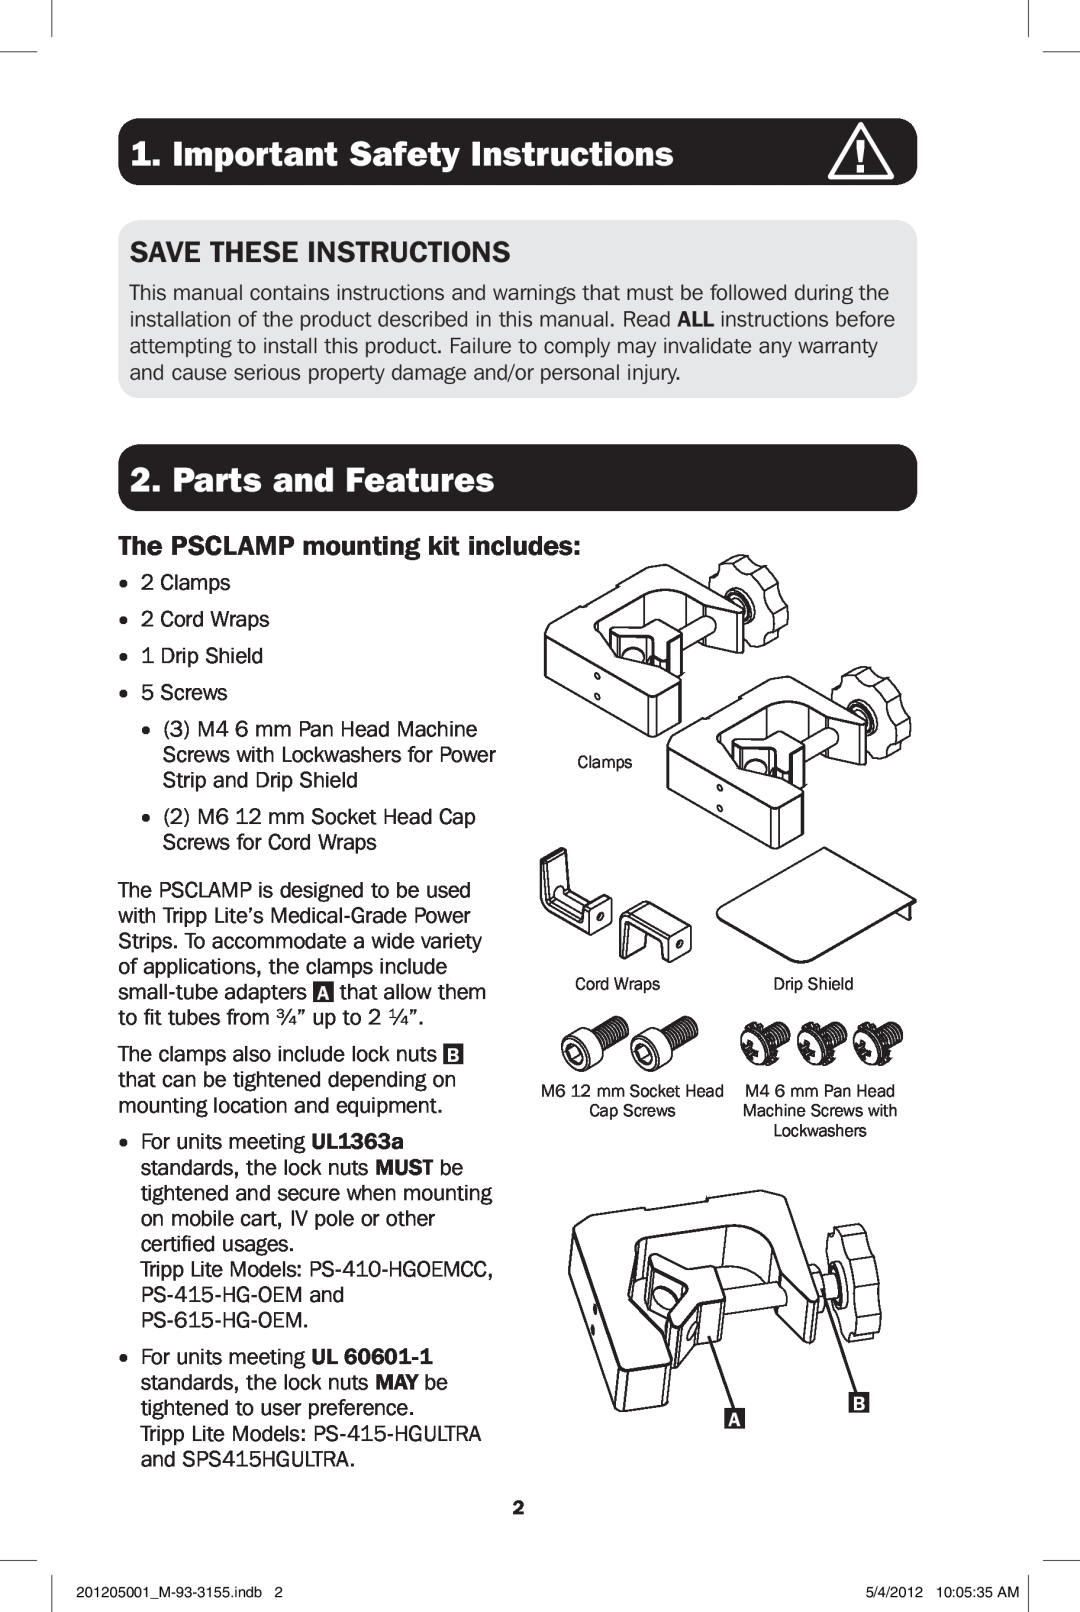 Tripp Lite PSCLAMP owner manual Important Safety Instructions, Parts and Features, Save These Instructions 